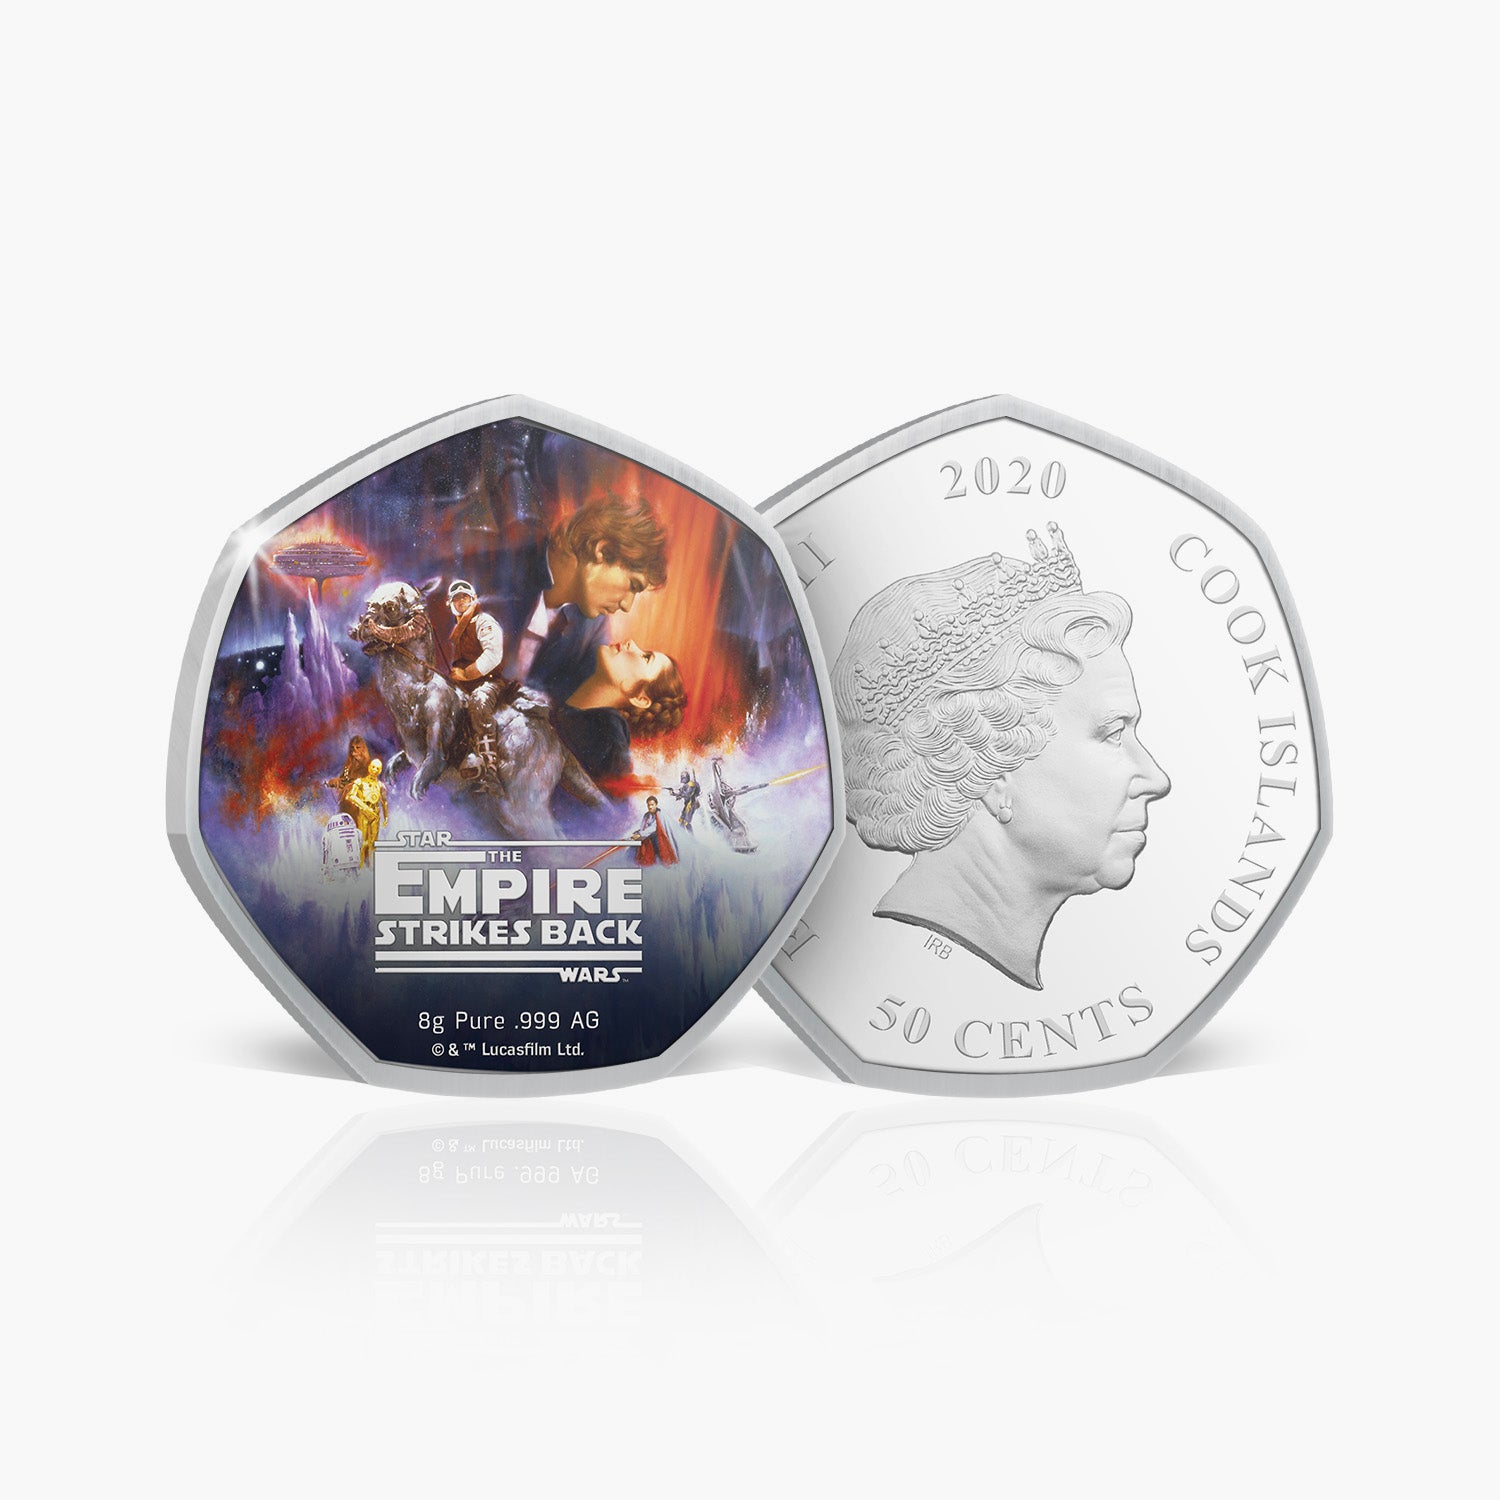 The Official 40th Anniversary The Empire Strikes Back Solid Silver Movie Coin